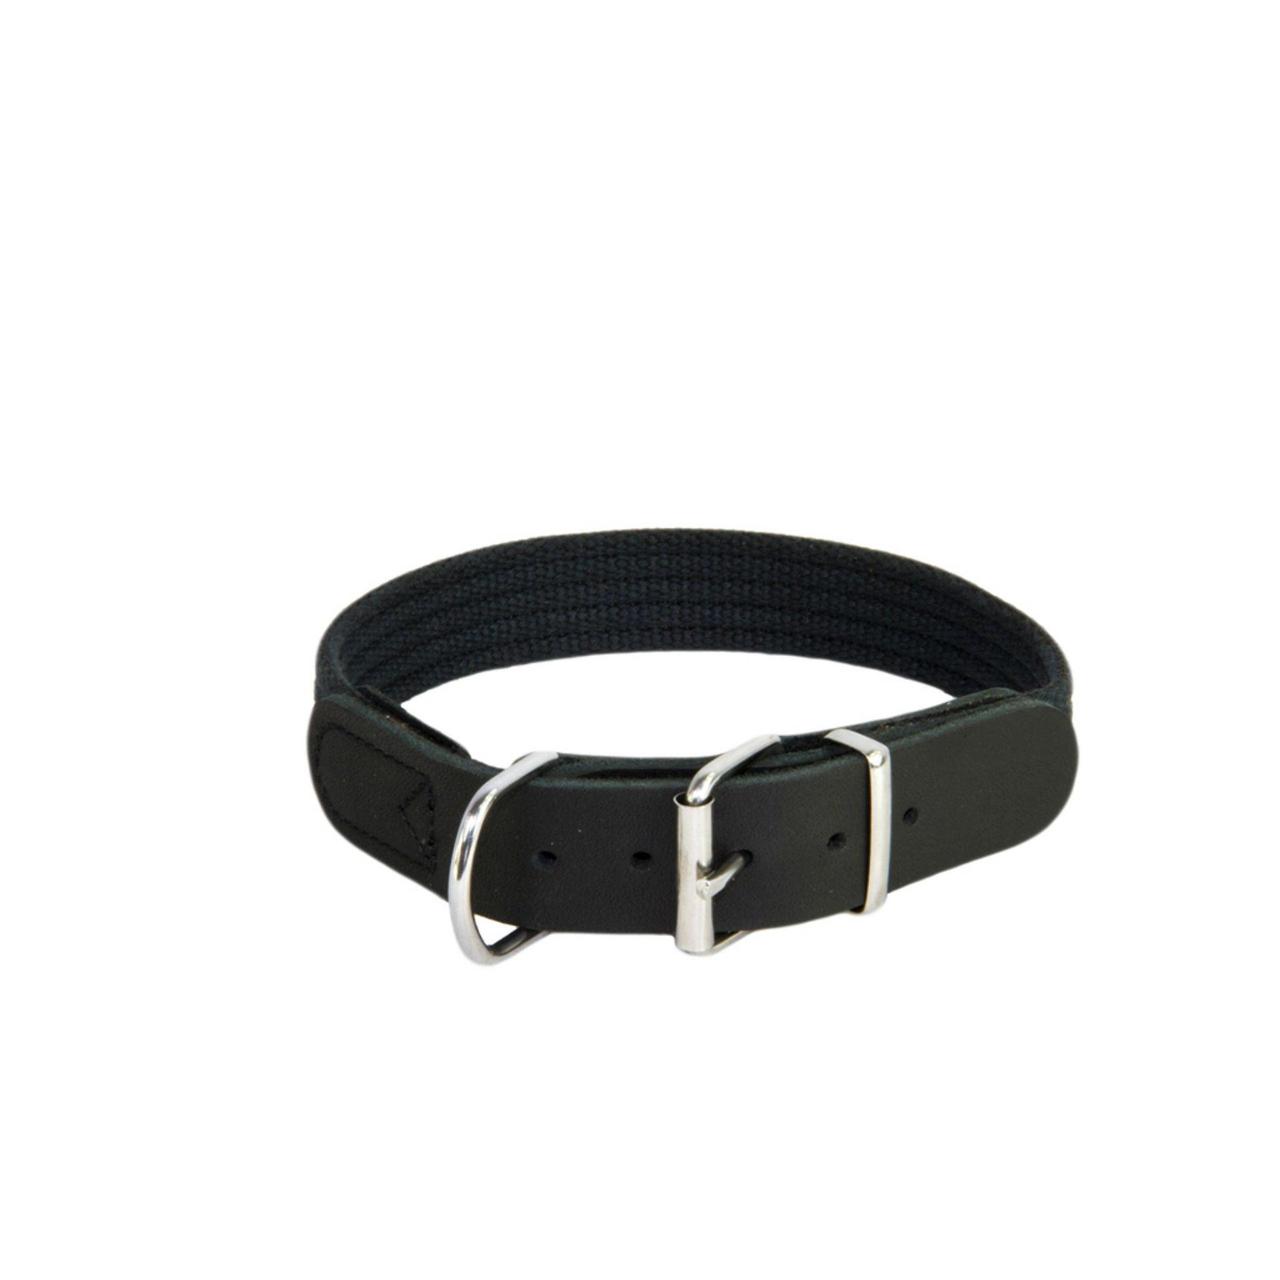 An image of Earthbound Cotton Black Collar 46 - 52cm